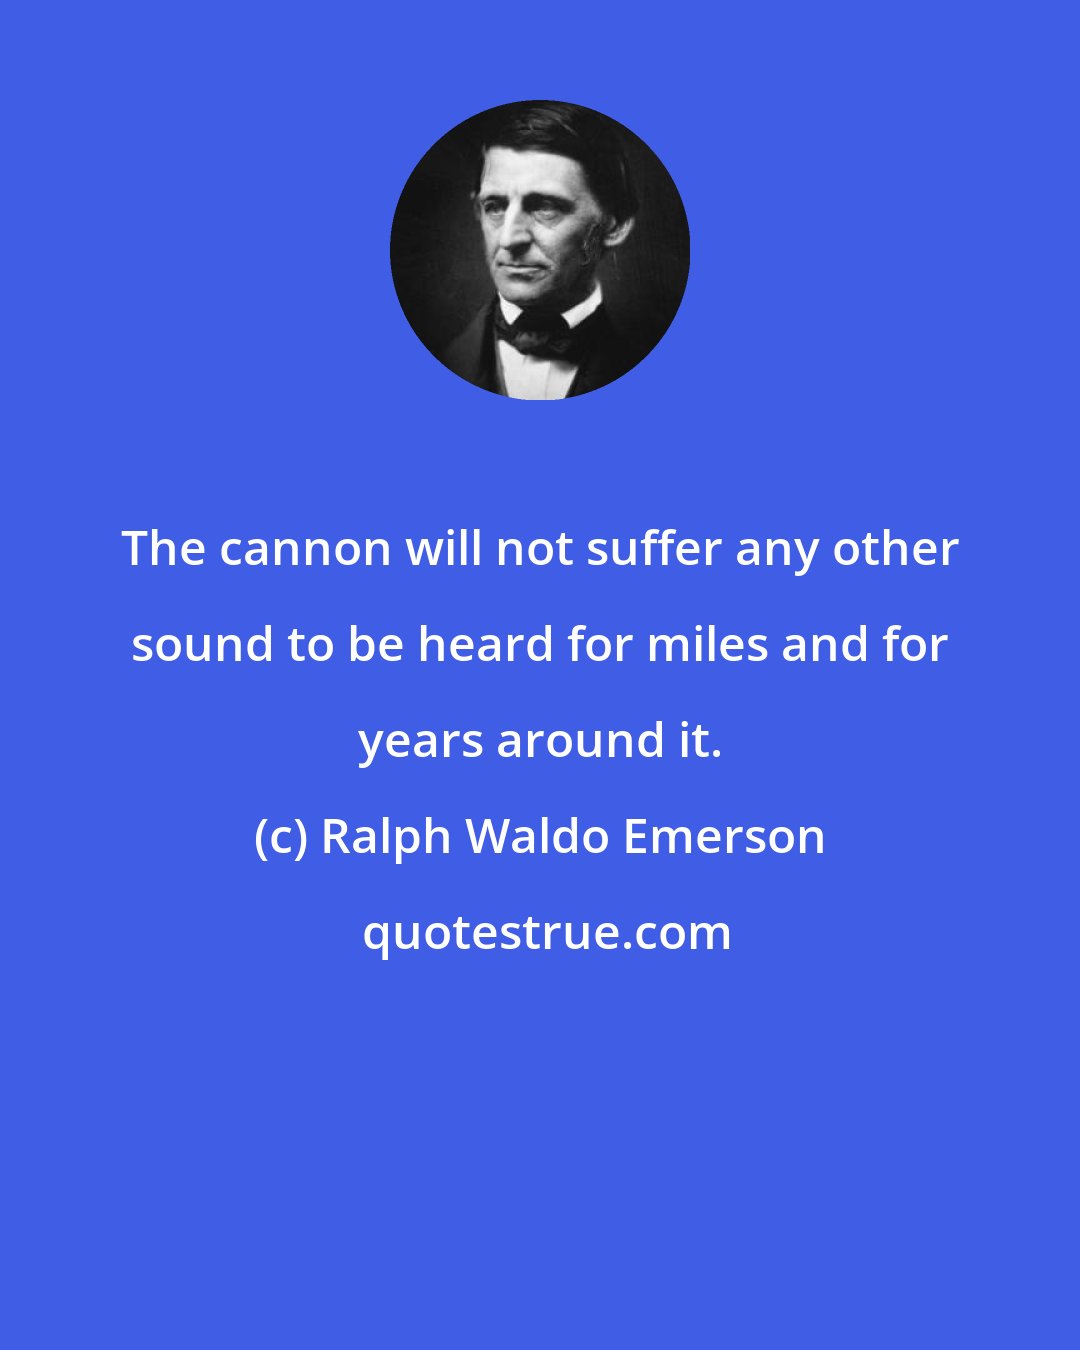 Ralph Waldo Emerson: The cannon will not suffer any other sound to be heard for miles and for years around it.